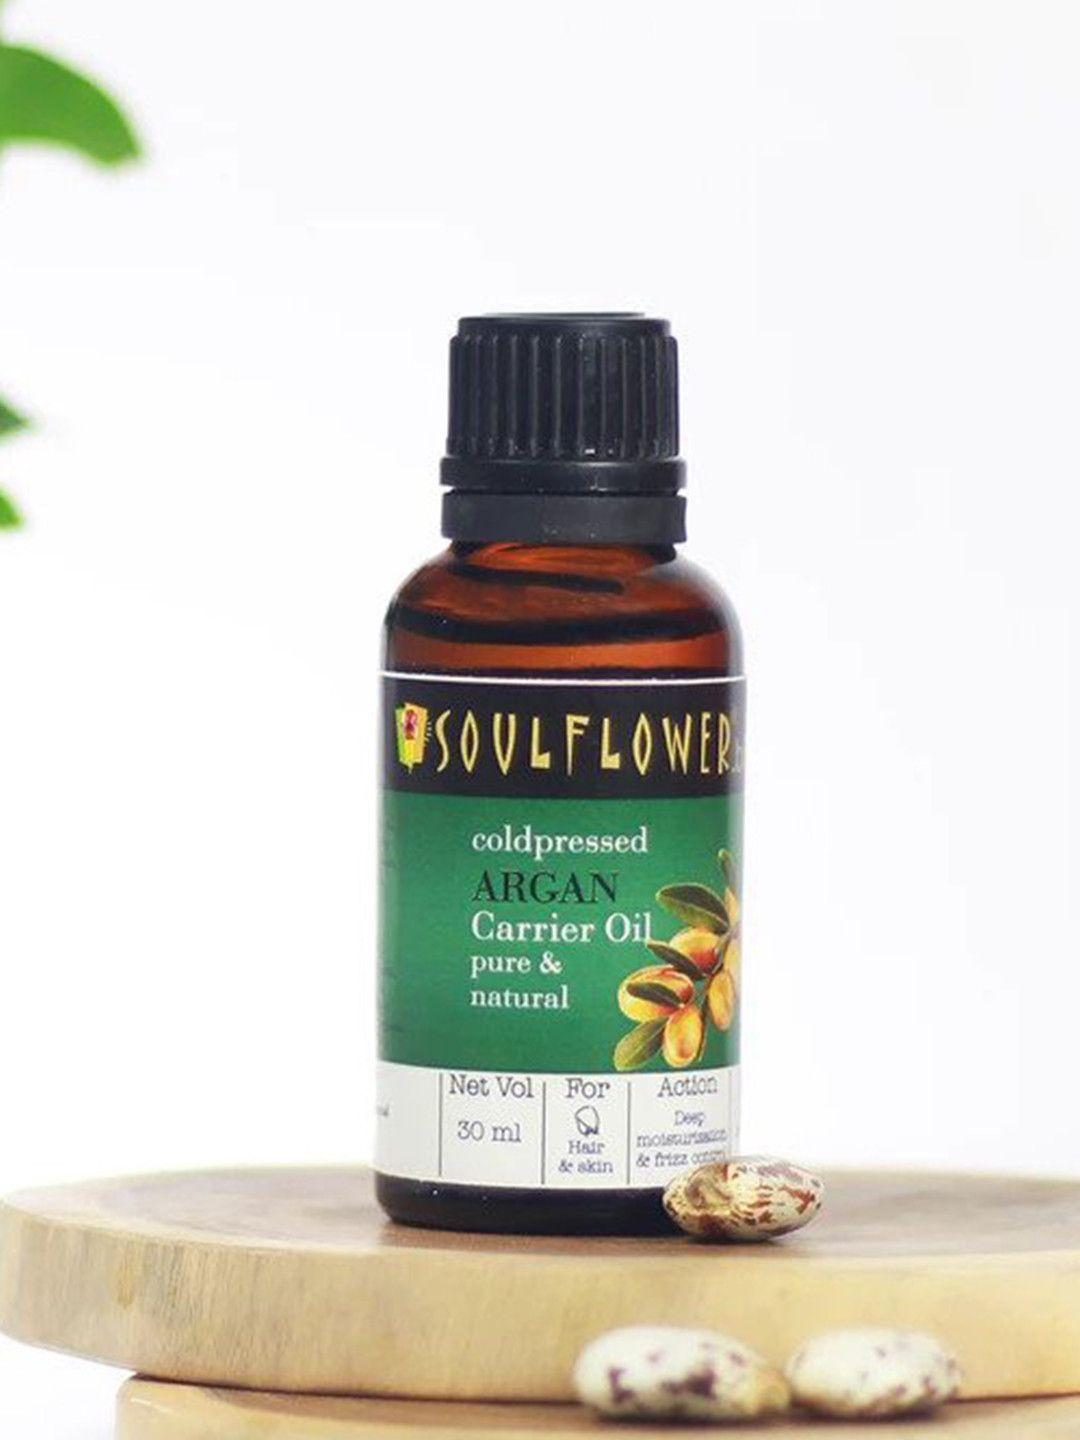 soulflower-natural-cold-pressed-argan-oil-for-skin,-hair-&-nails-to-moisturize---30-ml